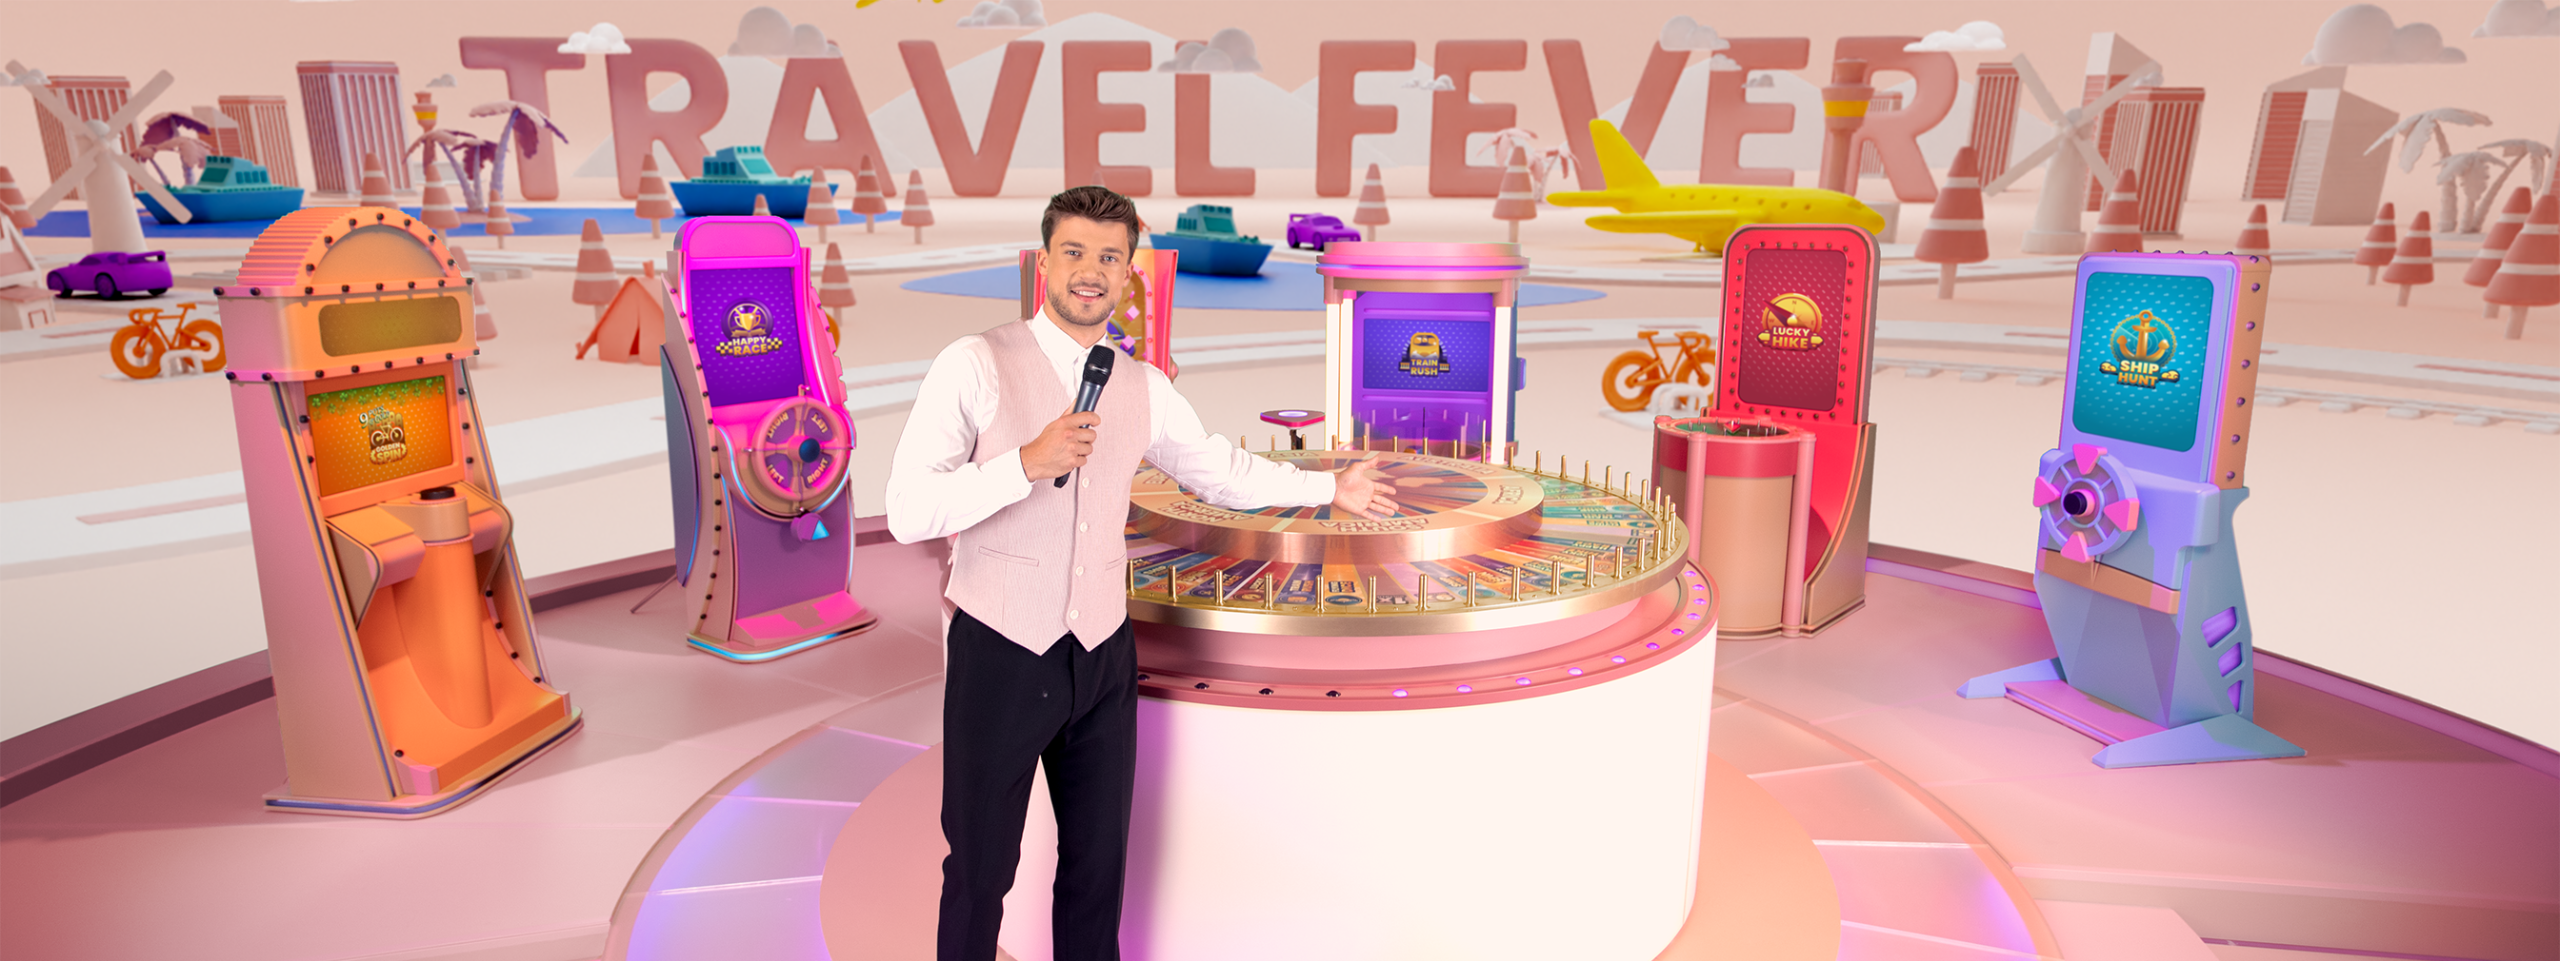 Screenshot of Travel Fever gameplay, featuring male presenter.